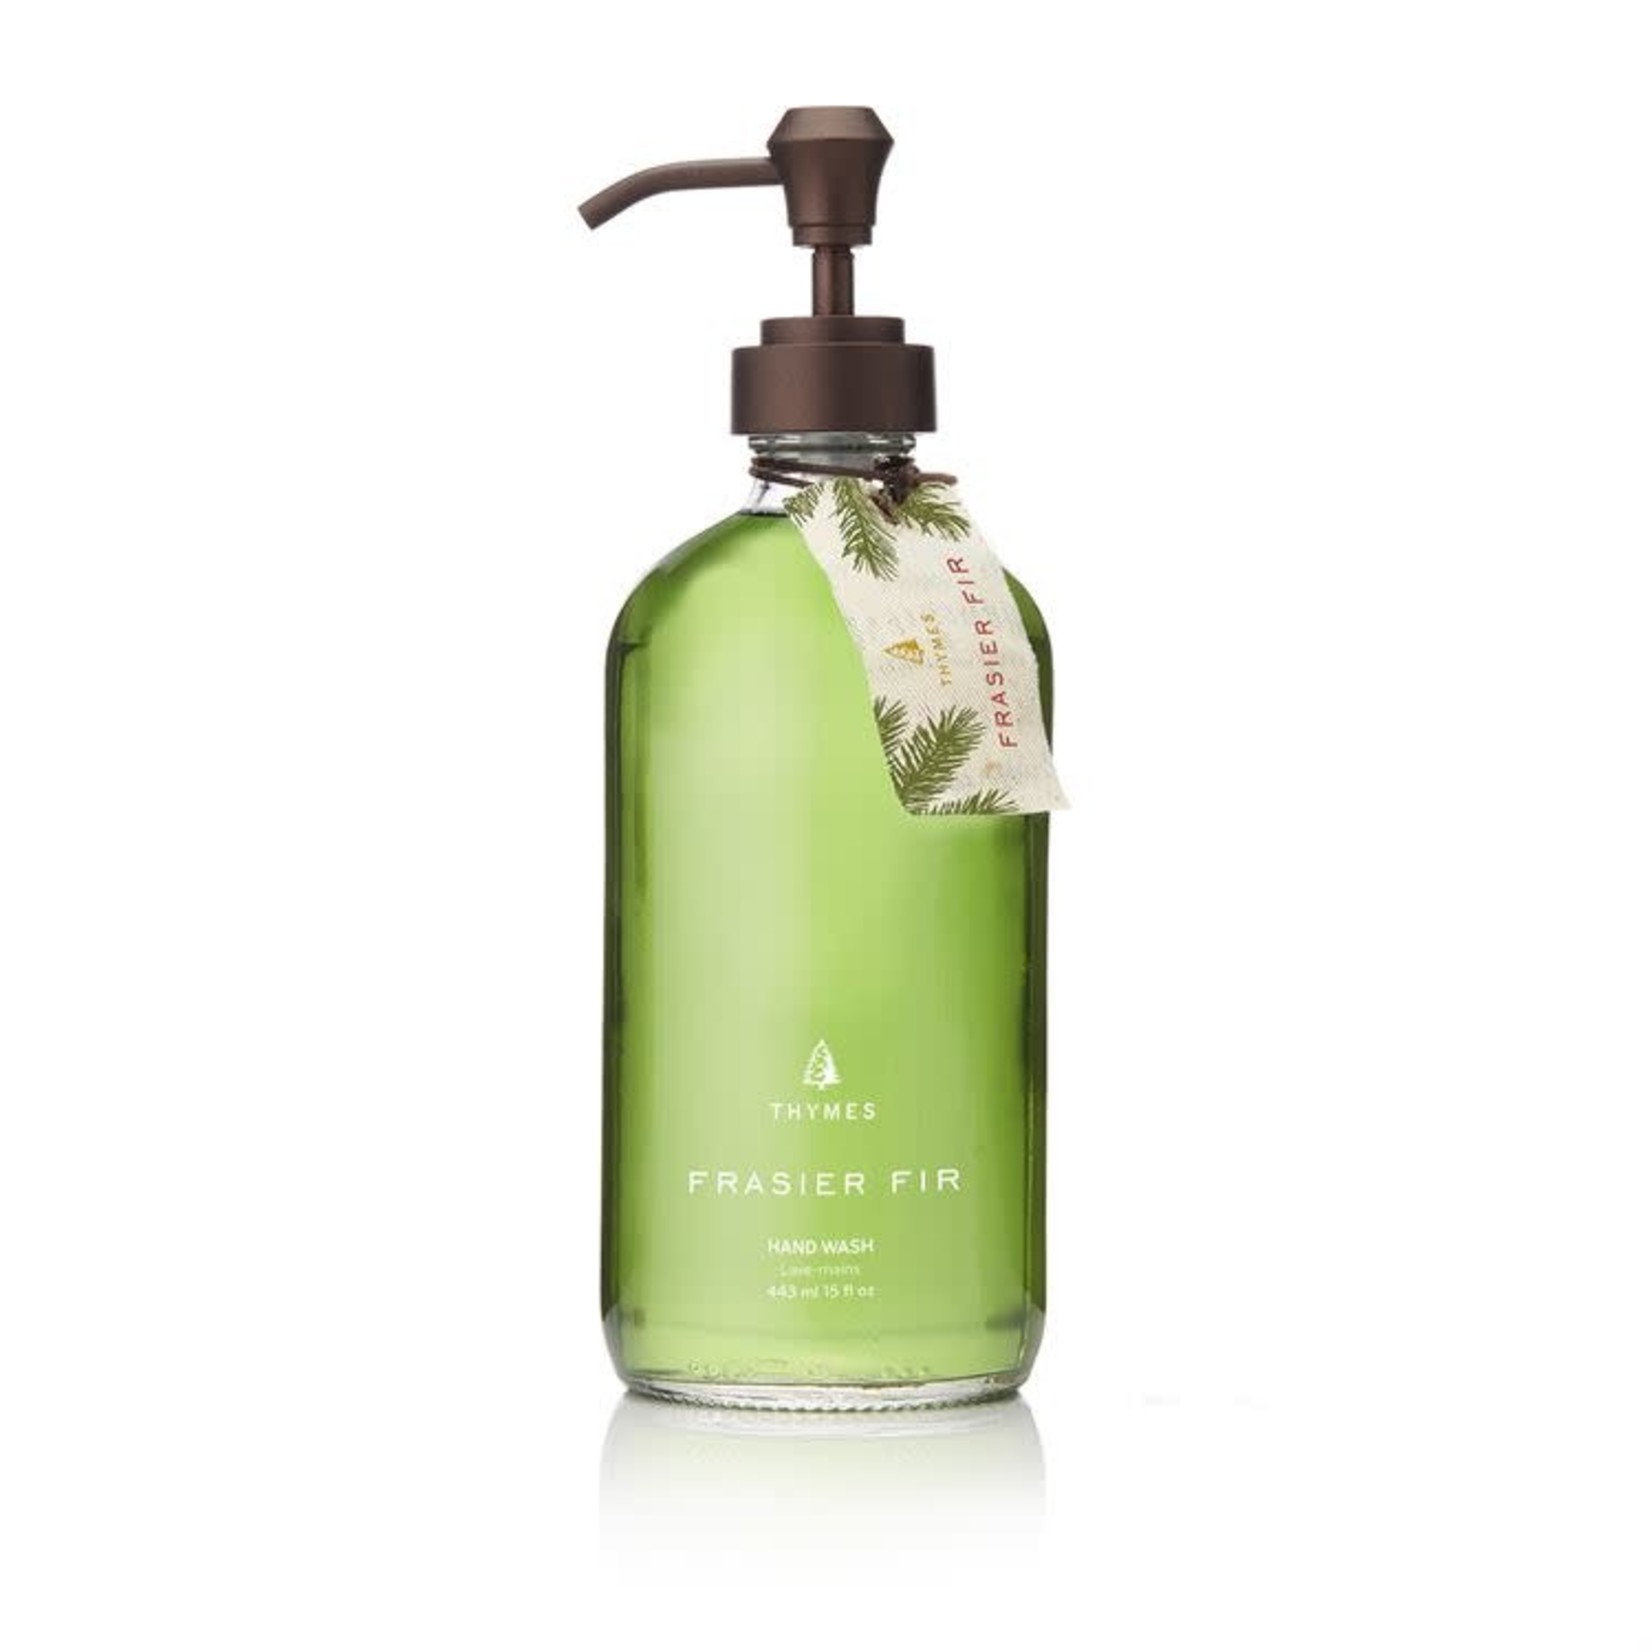 The Thymes Frasier Fir Hand Wash Large